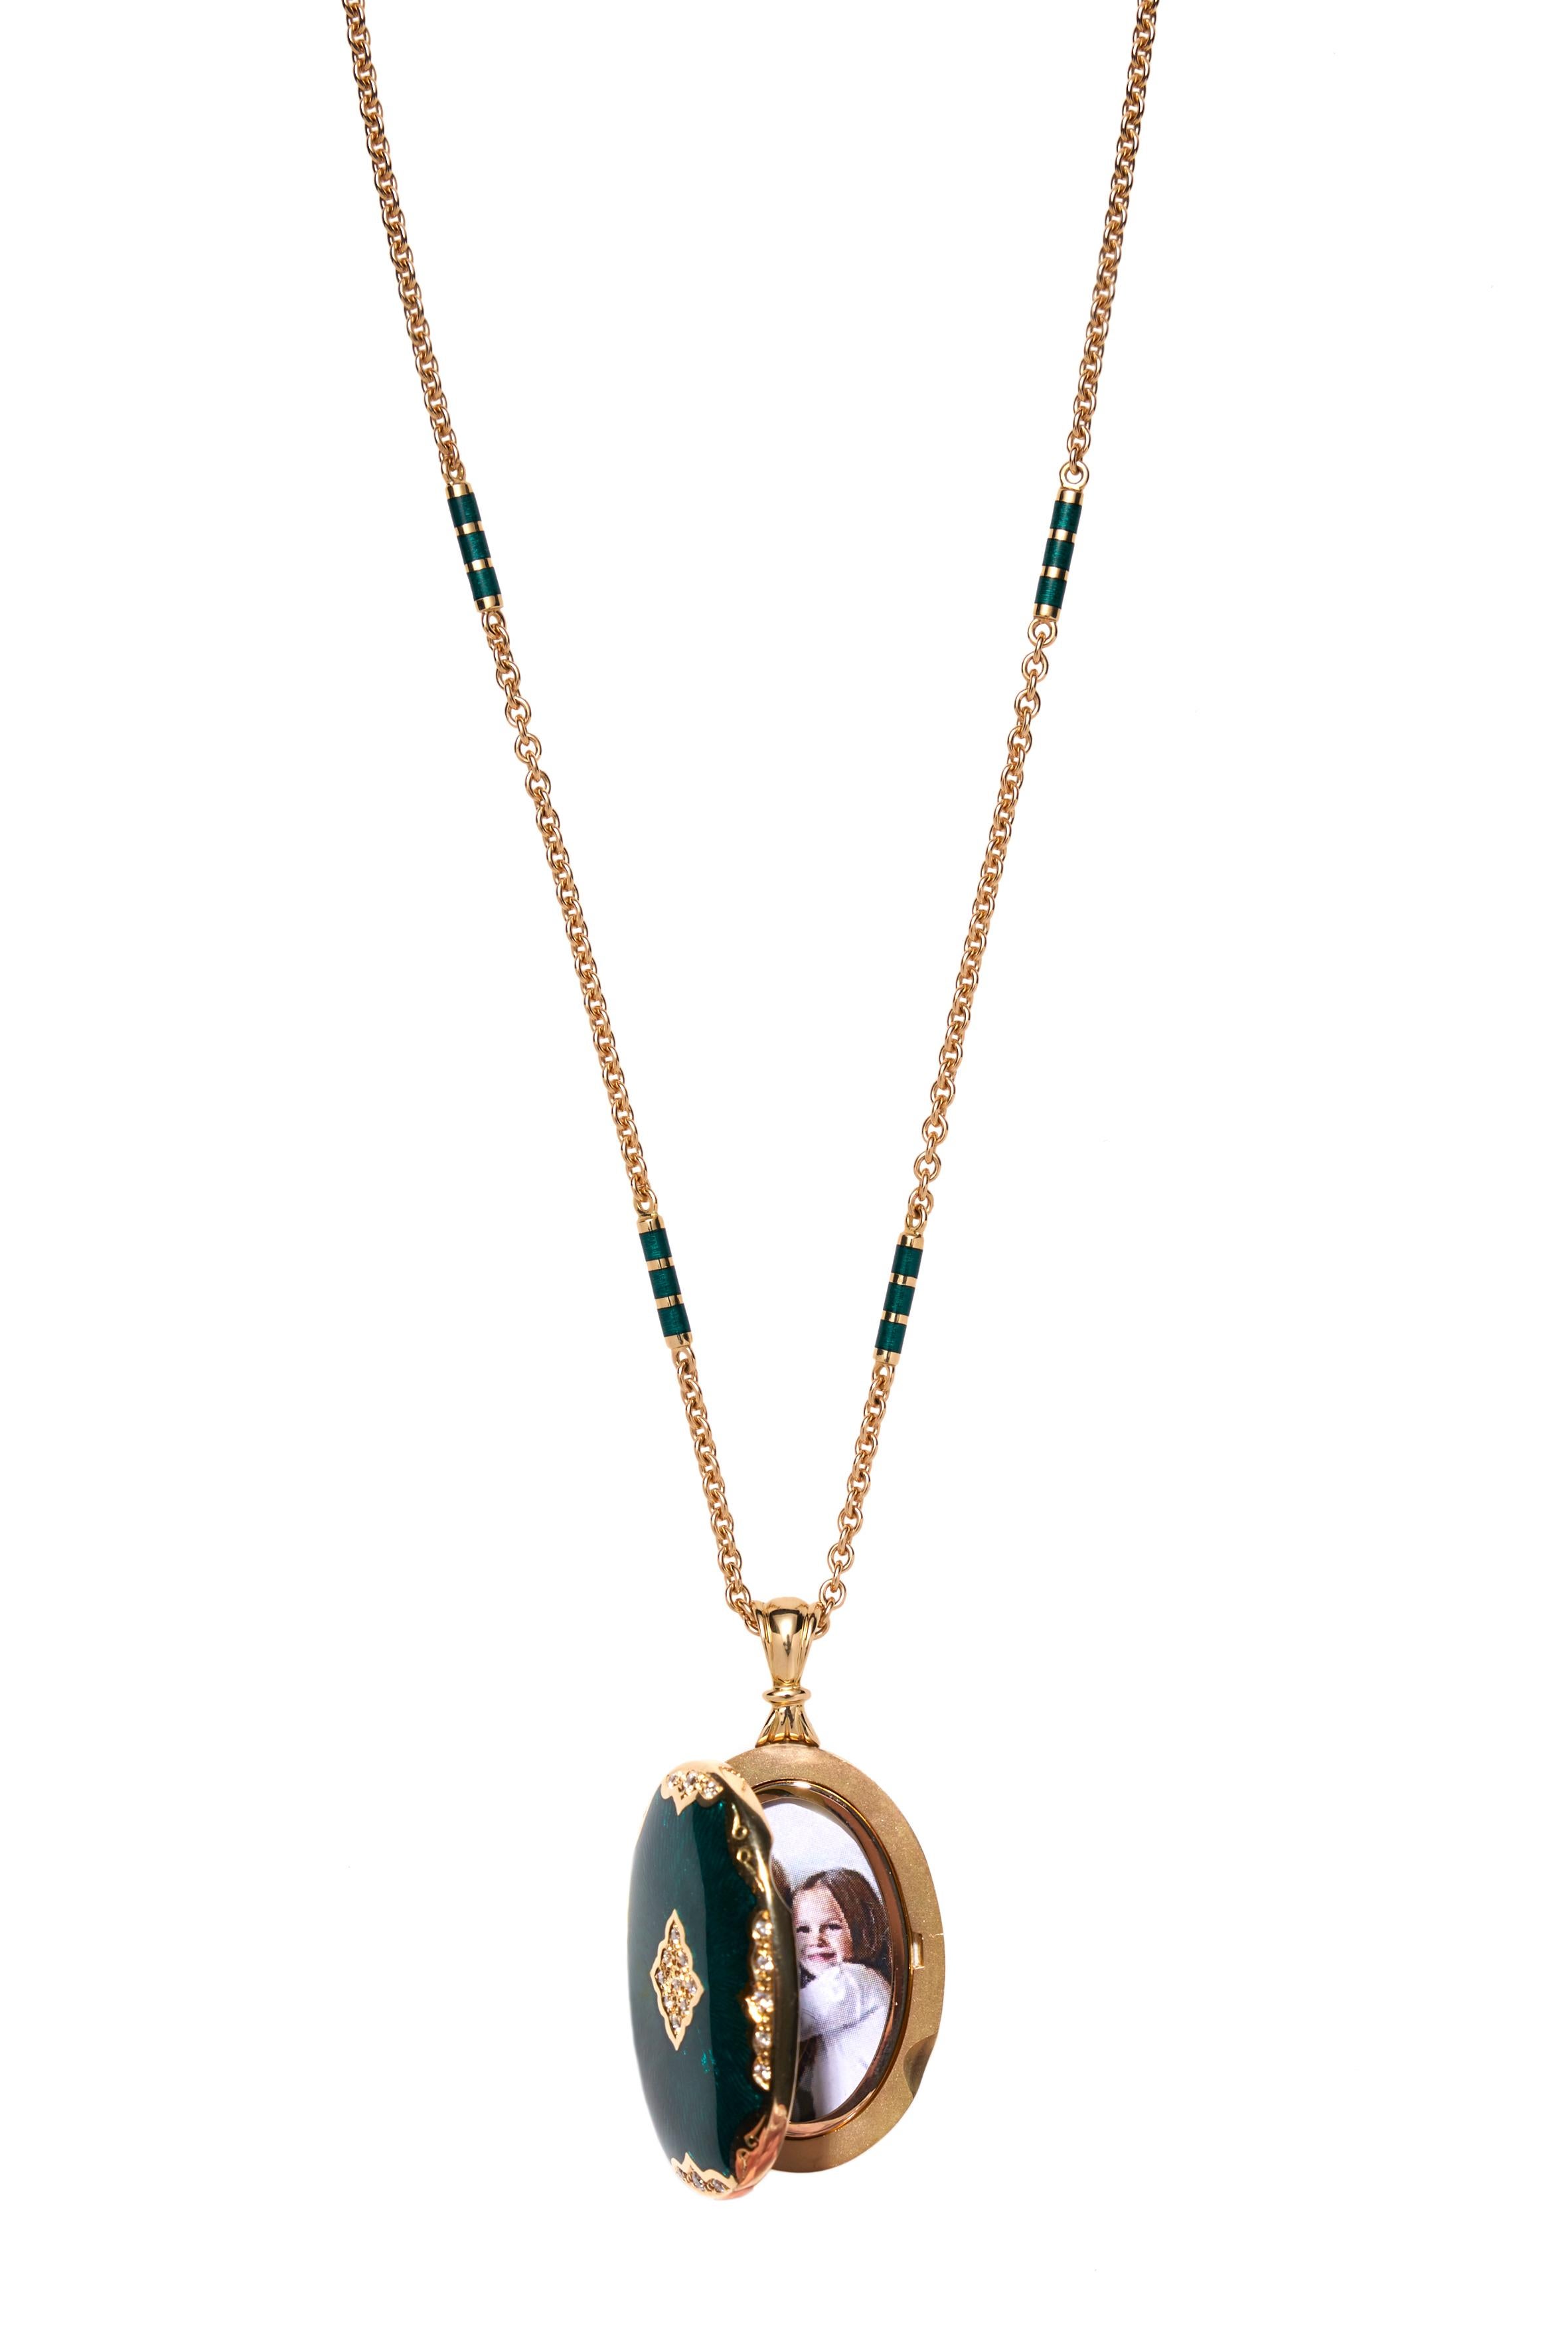 18 Karat gold locket pendant green enamel and diamonds.

Keep your treasure close to your heart; this My Locket is for you alone! The 18 karat yellow gold locket is adorned with vitreous enamel and 0.29 carat of diamonds. It comes on an 18kt gold